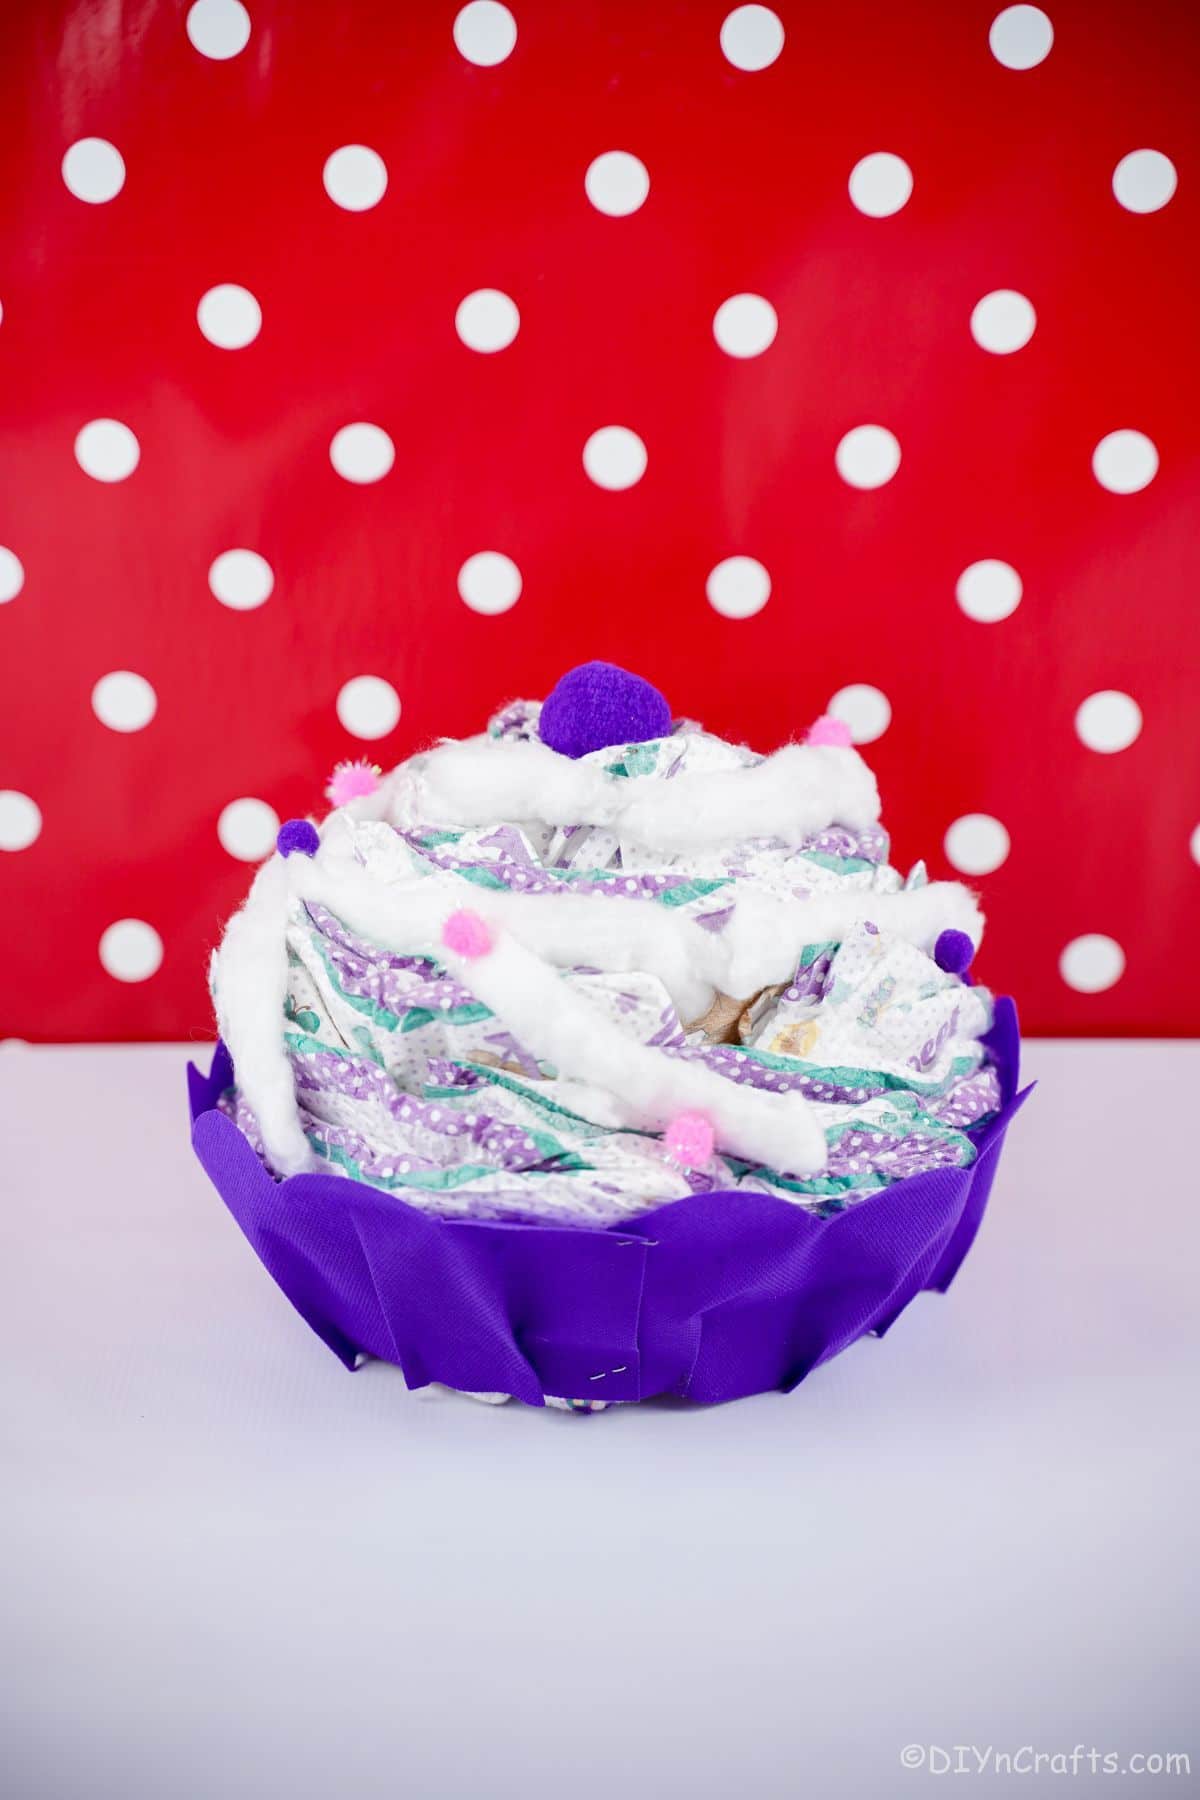 diaper cake with purple accents in front of red and white polka dot wall